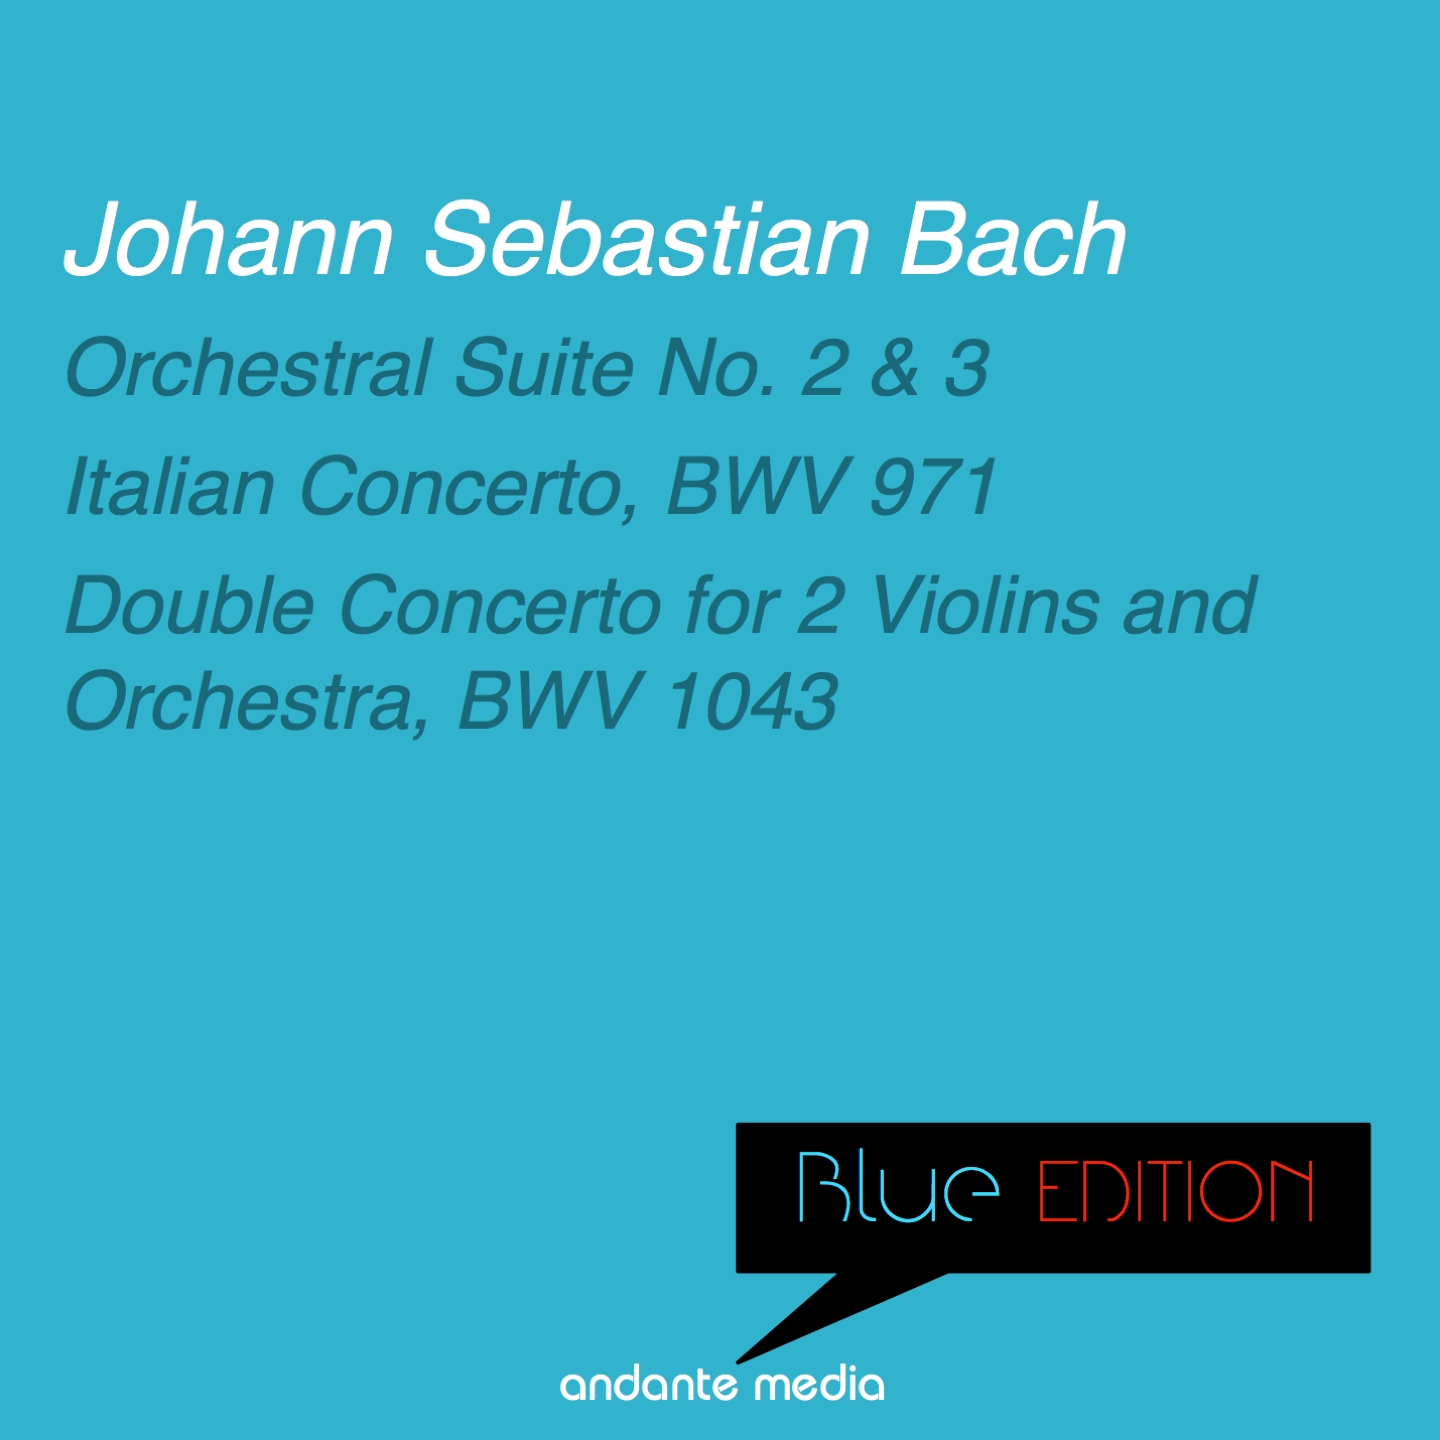 Blue Edition - Bach: Orchestral Suite No. 2, 3 & Double Concerto for 2 Violins and Orchestra, BWV 1043